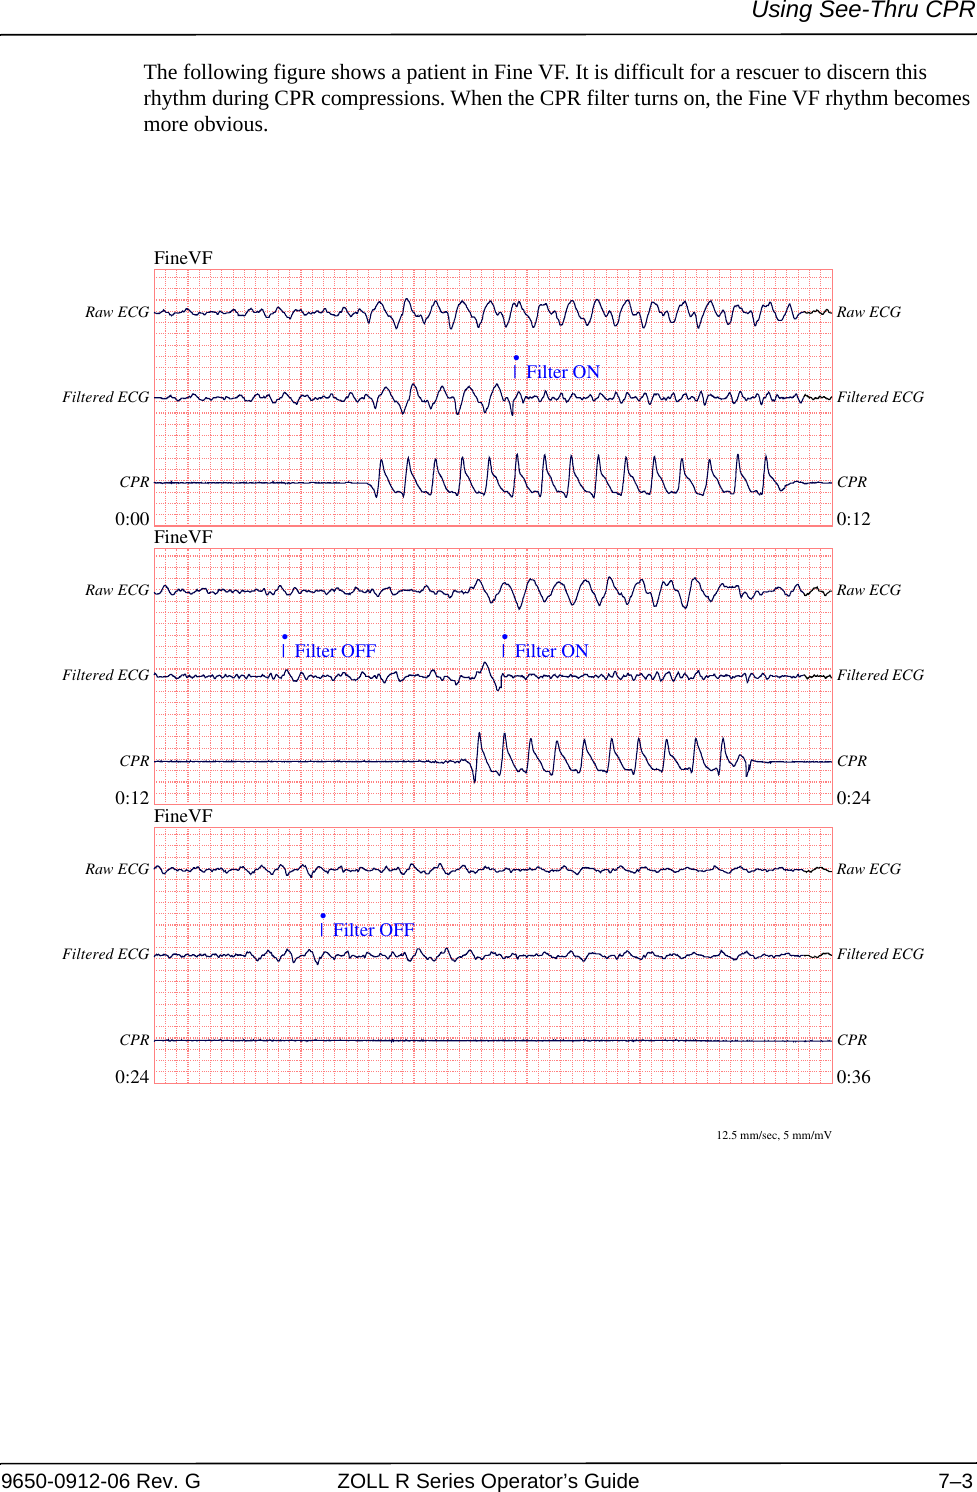 Using See-Thru CPR9650-0912-06 Rev. G ZOLL R Series Operator’s Guide 7–3The following figure shows a patient in Fine VF. It is difficult for a rescuer to discern this rhythm during CPR compressions. When the CPR filter turns on, the Fine VF rhythm becomes more obvious.FineVF0:00 0:12Raw ECG Raw ECGFiltered ECG Filtered ECGCPR CPR|  Filter ON•FineVF0:12 0:24Raw ECG Raw ECGFiltered ECG Filtered ECGCPR CPR|  Filter OFF•|  Filter ON•FineVF0:24 0:36Raw ECG Raw ECGFiltered ECG Filtered ECGCPR CPR|  Filter OFF•12.5 mm/sec, 5 mm/mV